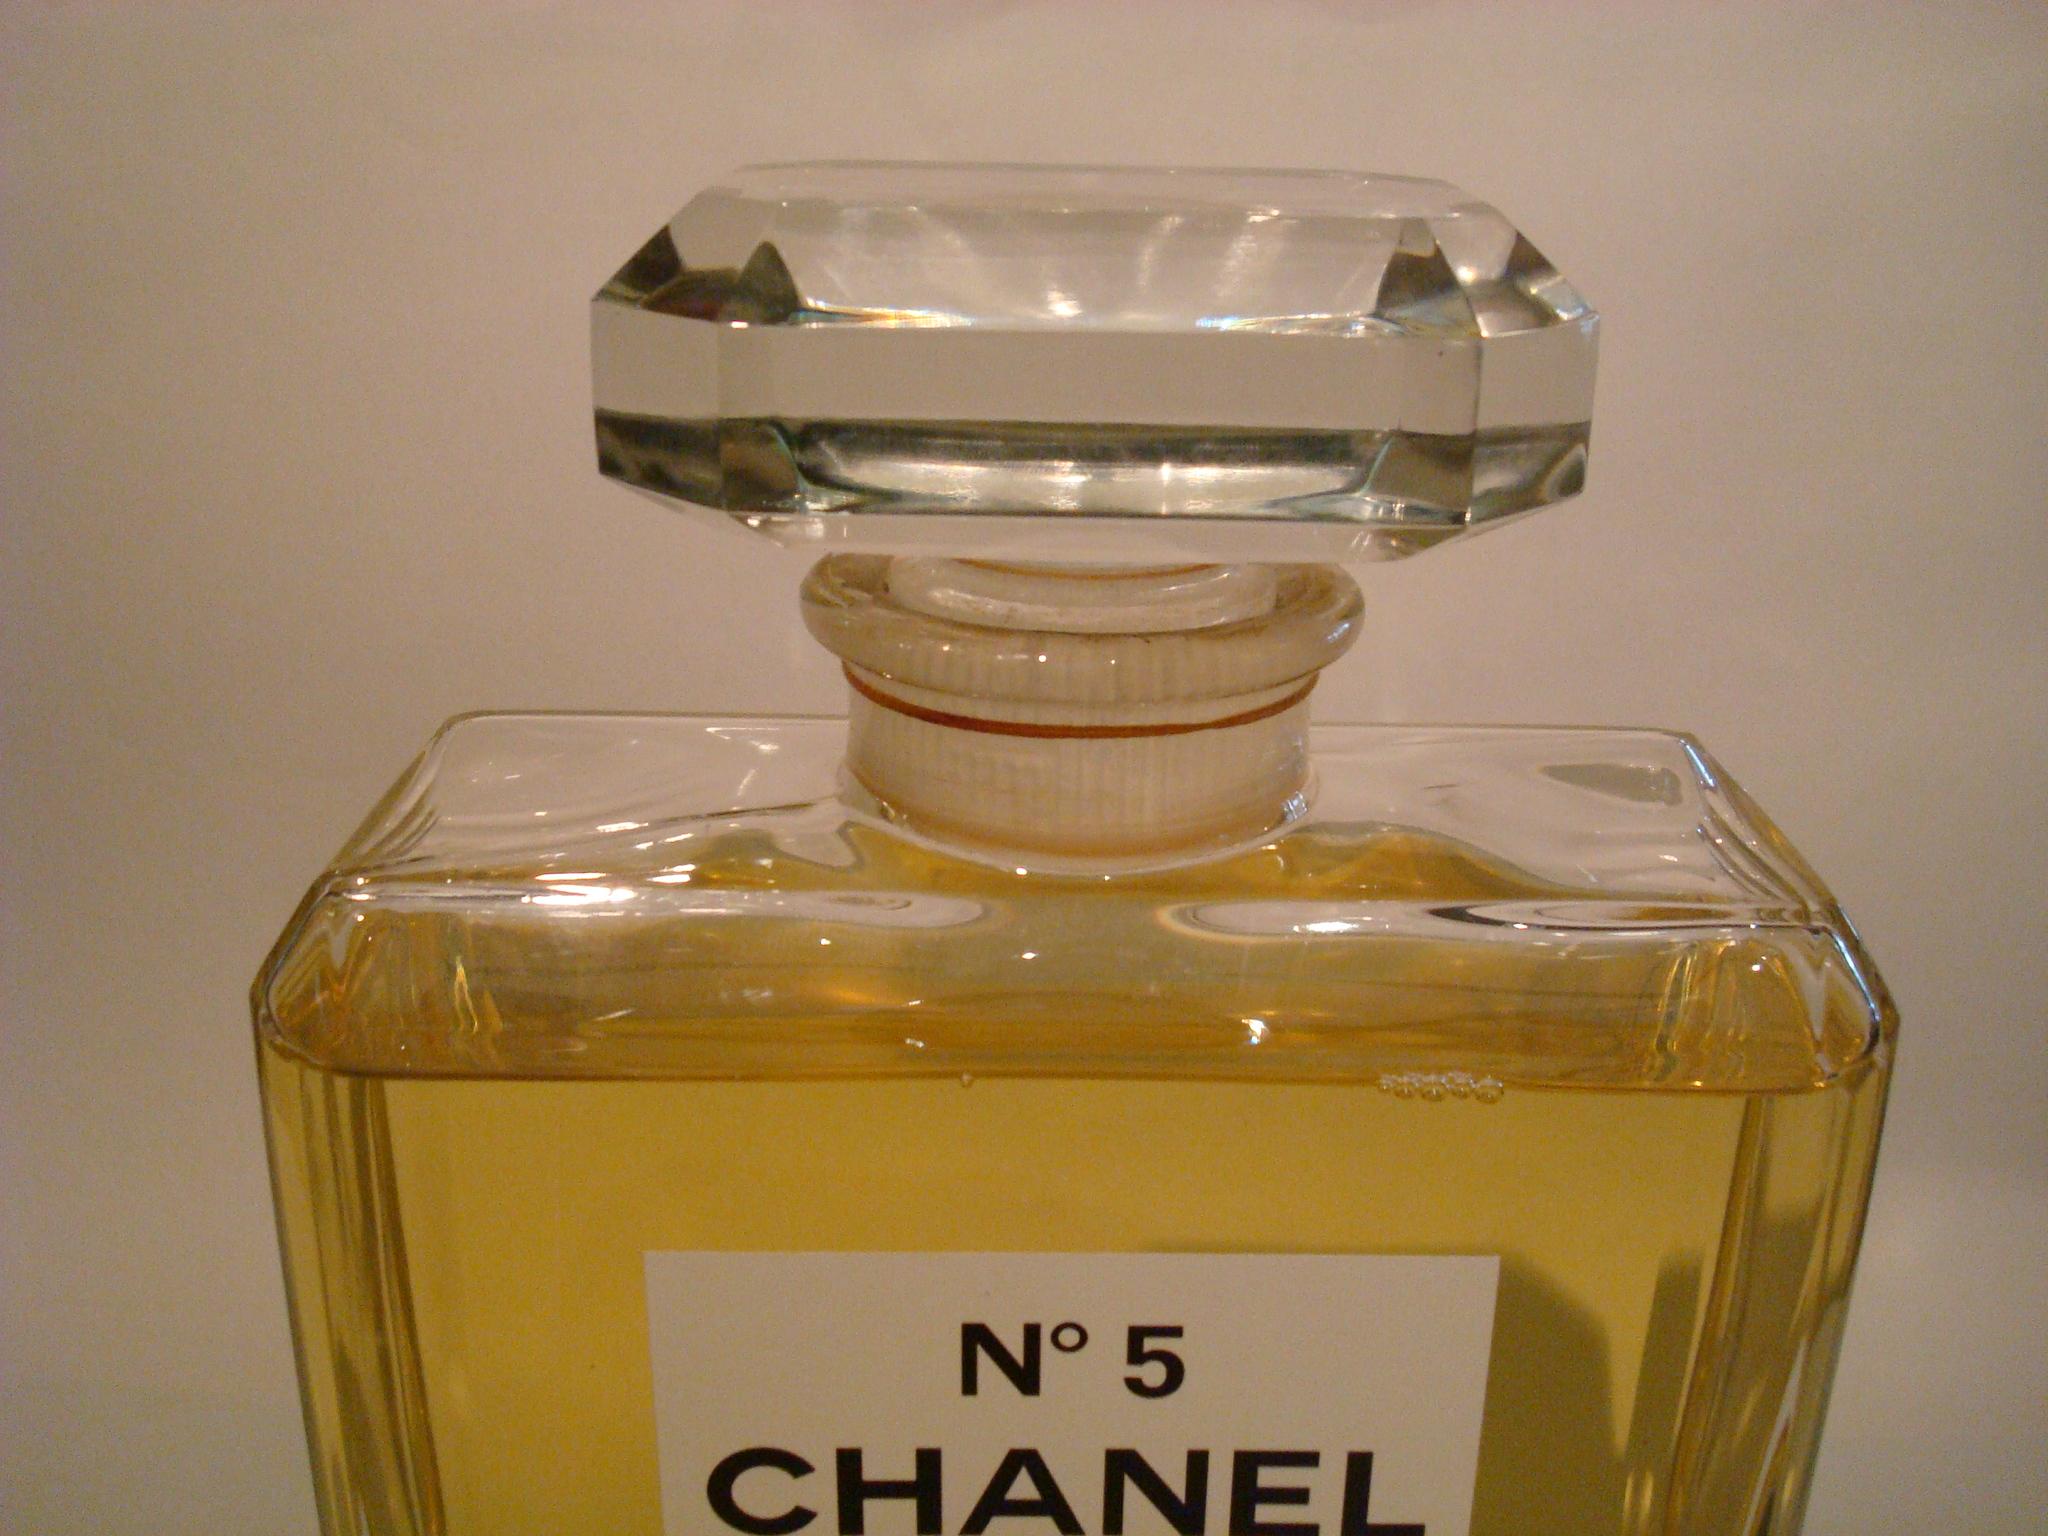 Store display large perfume advertising. (factice / dummy perfume bottle, it's not perfume, it's colored water). Perfect to decorate a guest bathroom. Everyone loves Chanel. Rare vintage Chanel No. 5 huge factice dummy display bottle this is a huge